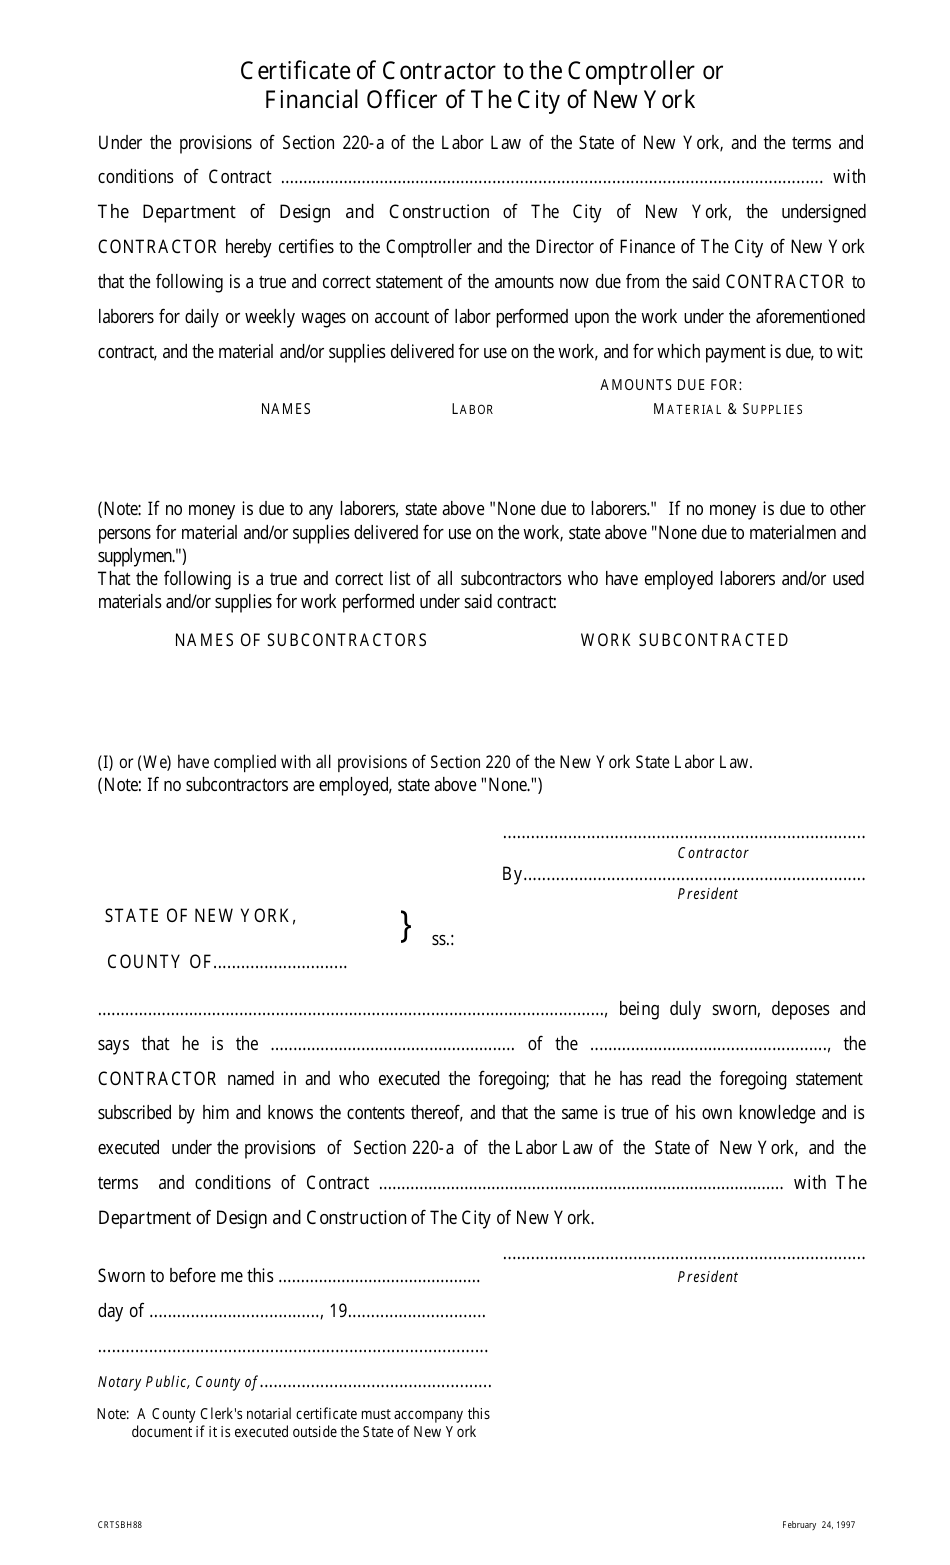 Certificate of Contractor to the Comptroller or Financial Officer of the City of New York - New York City, Page 1